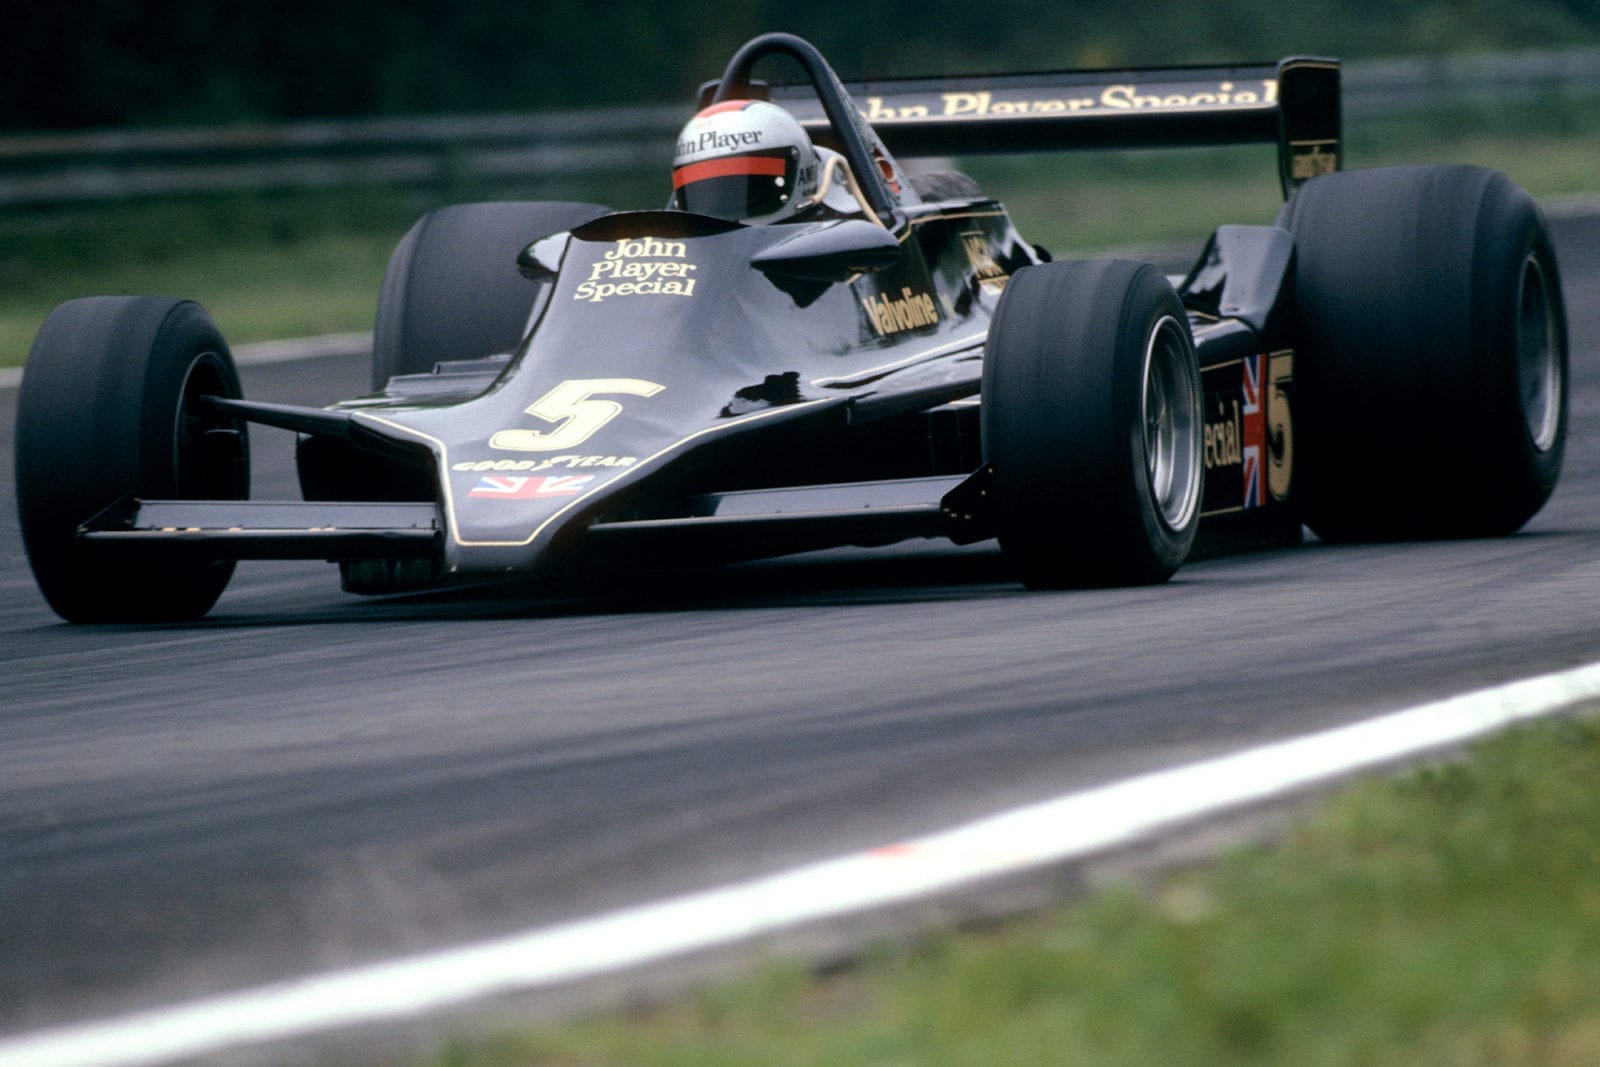 Mario Andretti in the Lotus 79 during the 1978 Belgian Grand Prix at Zolder